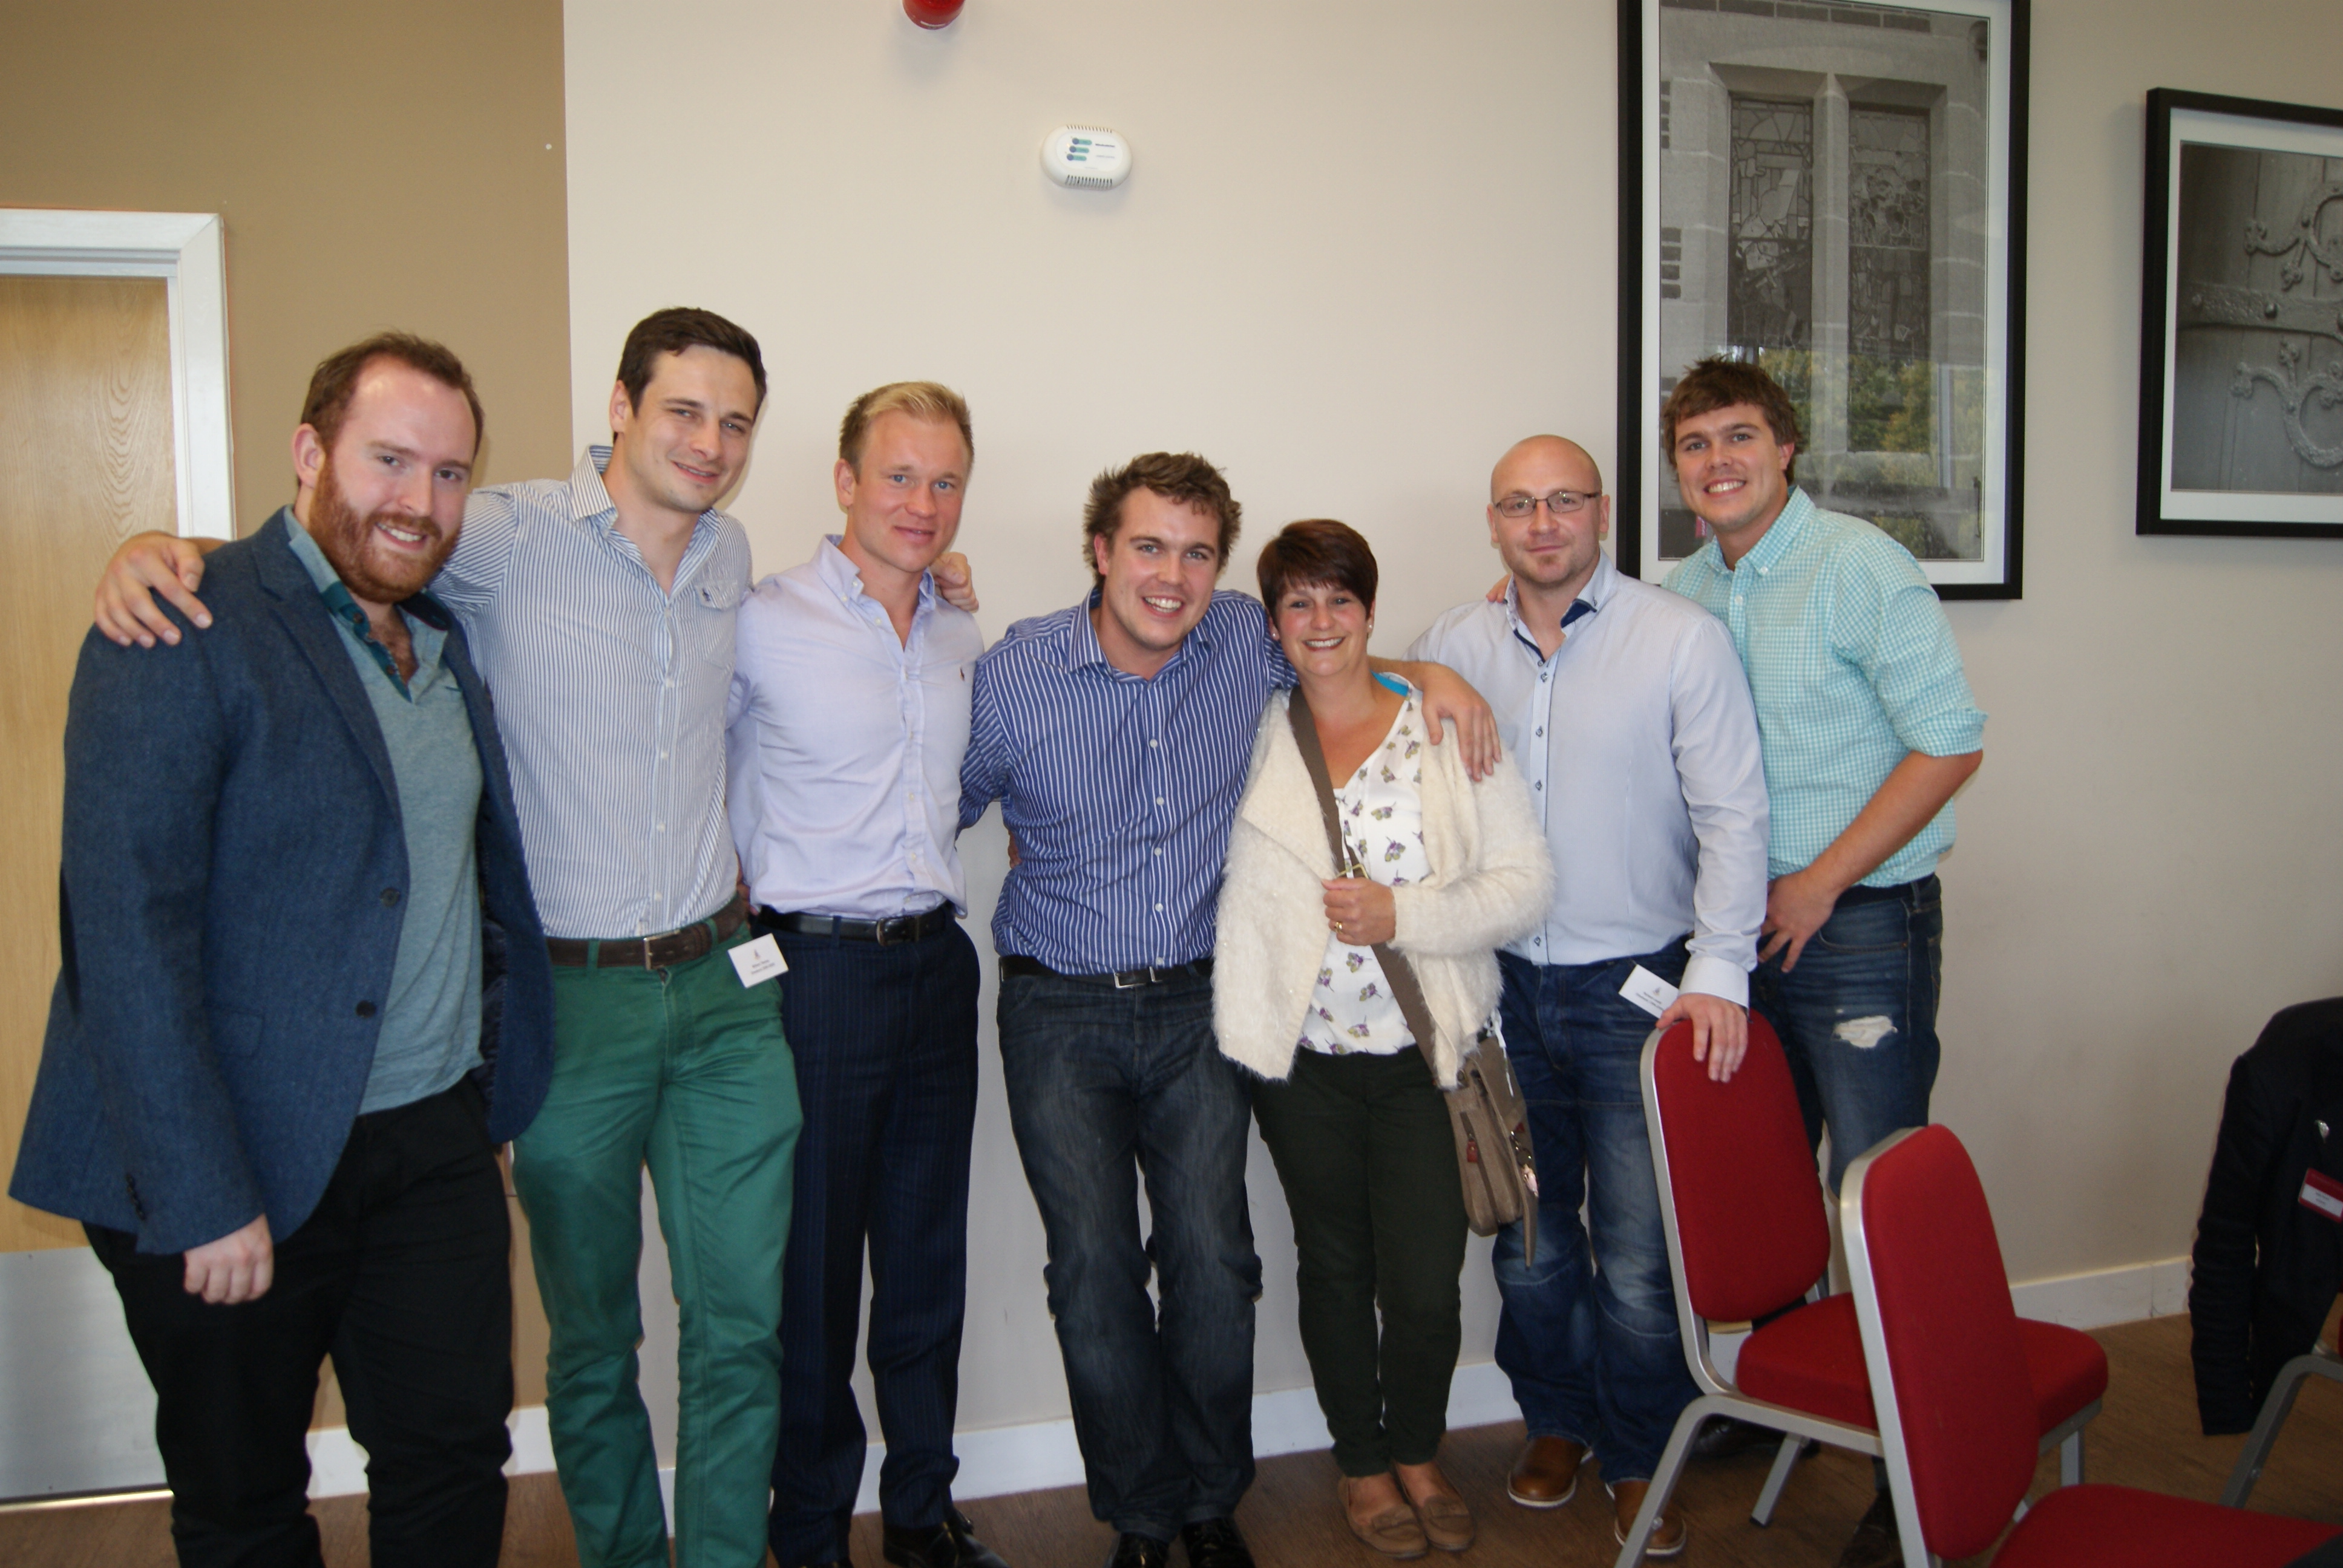 2005 Leavers' Reunion, 3/10/2015 - Michael Cottrell, Will Thomas, James Fouracre, Mark Bagshaw, Mrs Pugh, Richard Levett and Andrew Bagshaw